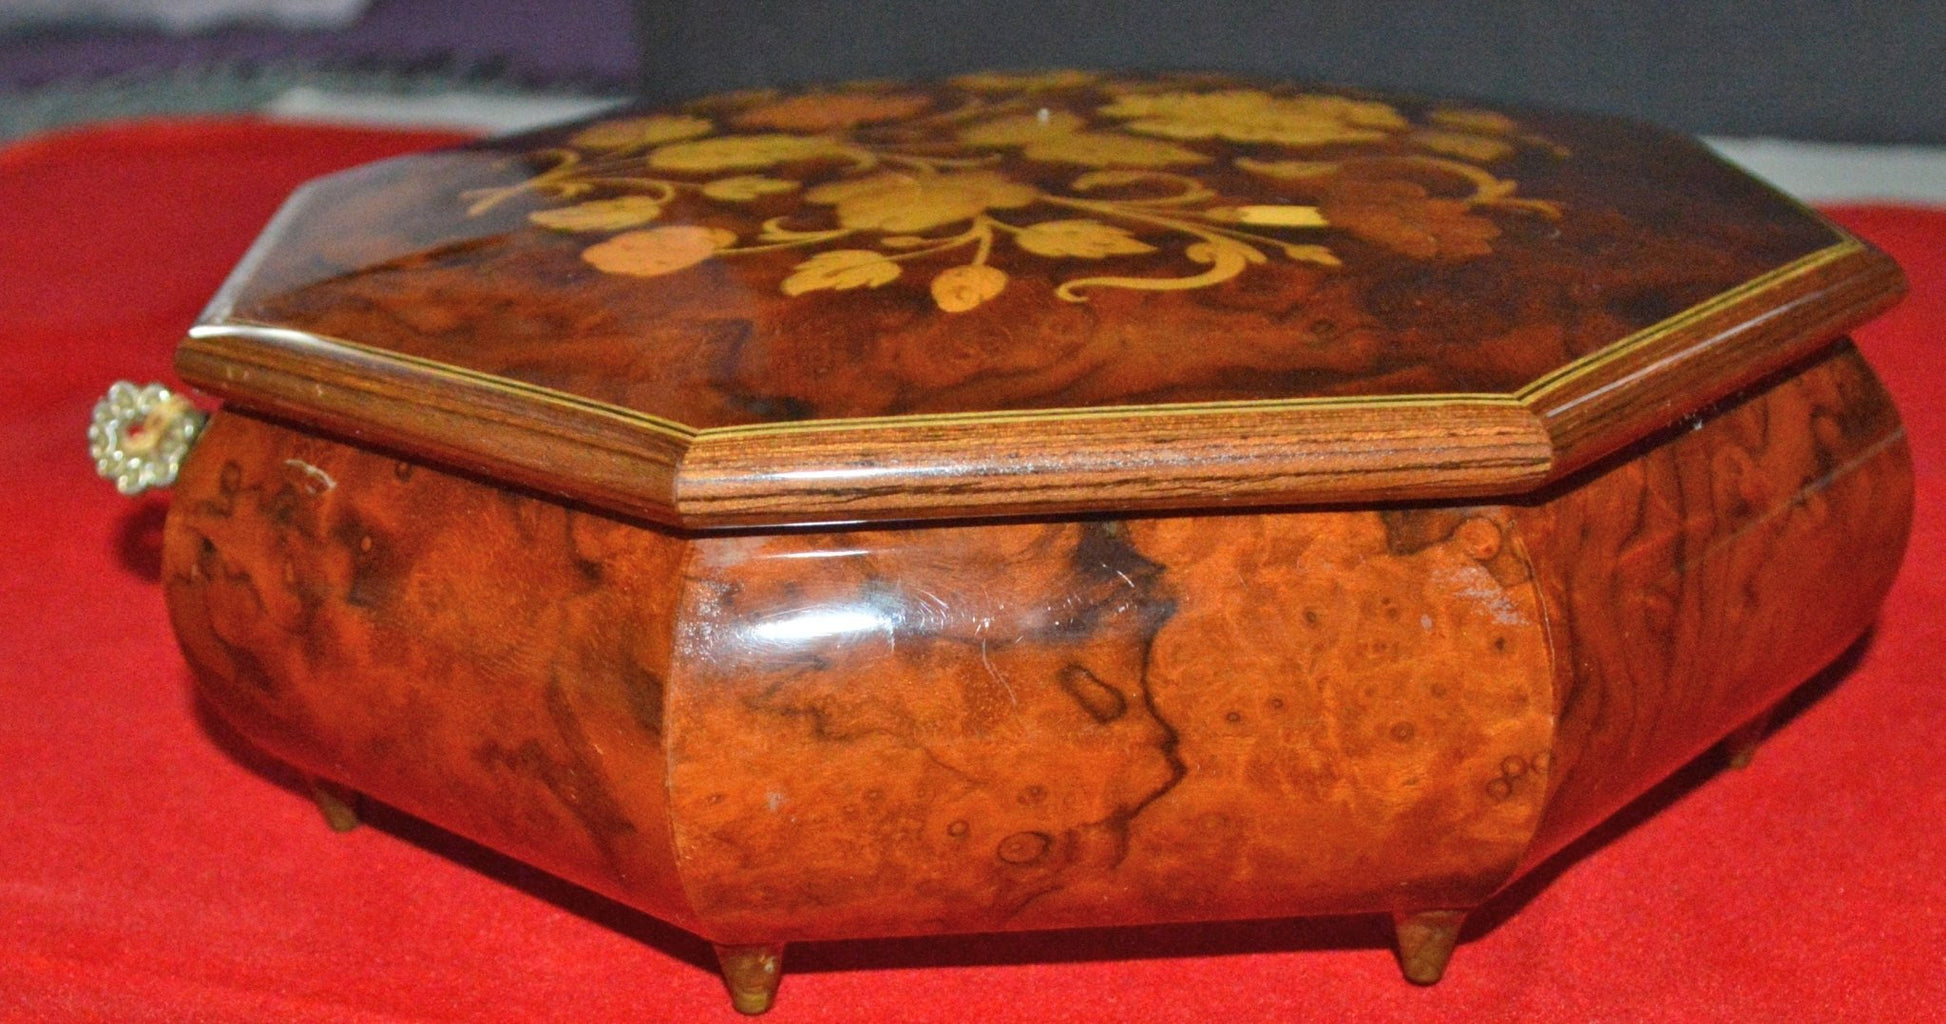 SORRENTO OCTAGONAL MARQUETRY MUSICAL JEWELLERY BOX PLAYS LOVE STORY(PREVIOUSLY OWNED) GOOD CONDITION - TMD167207